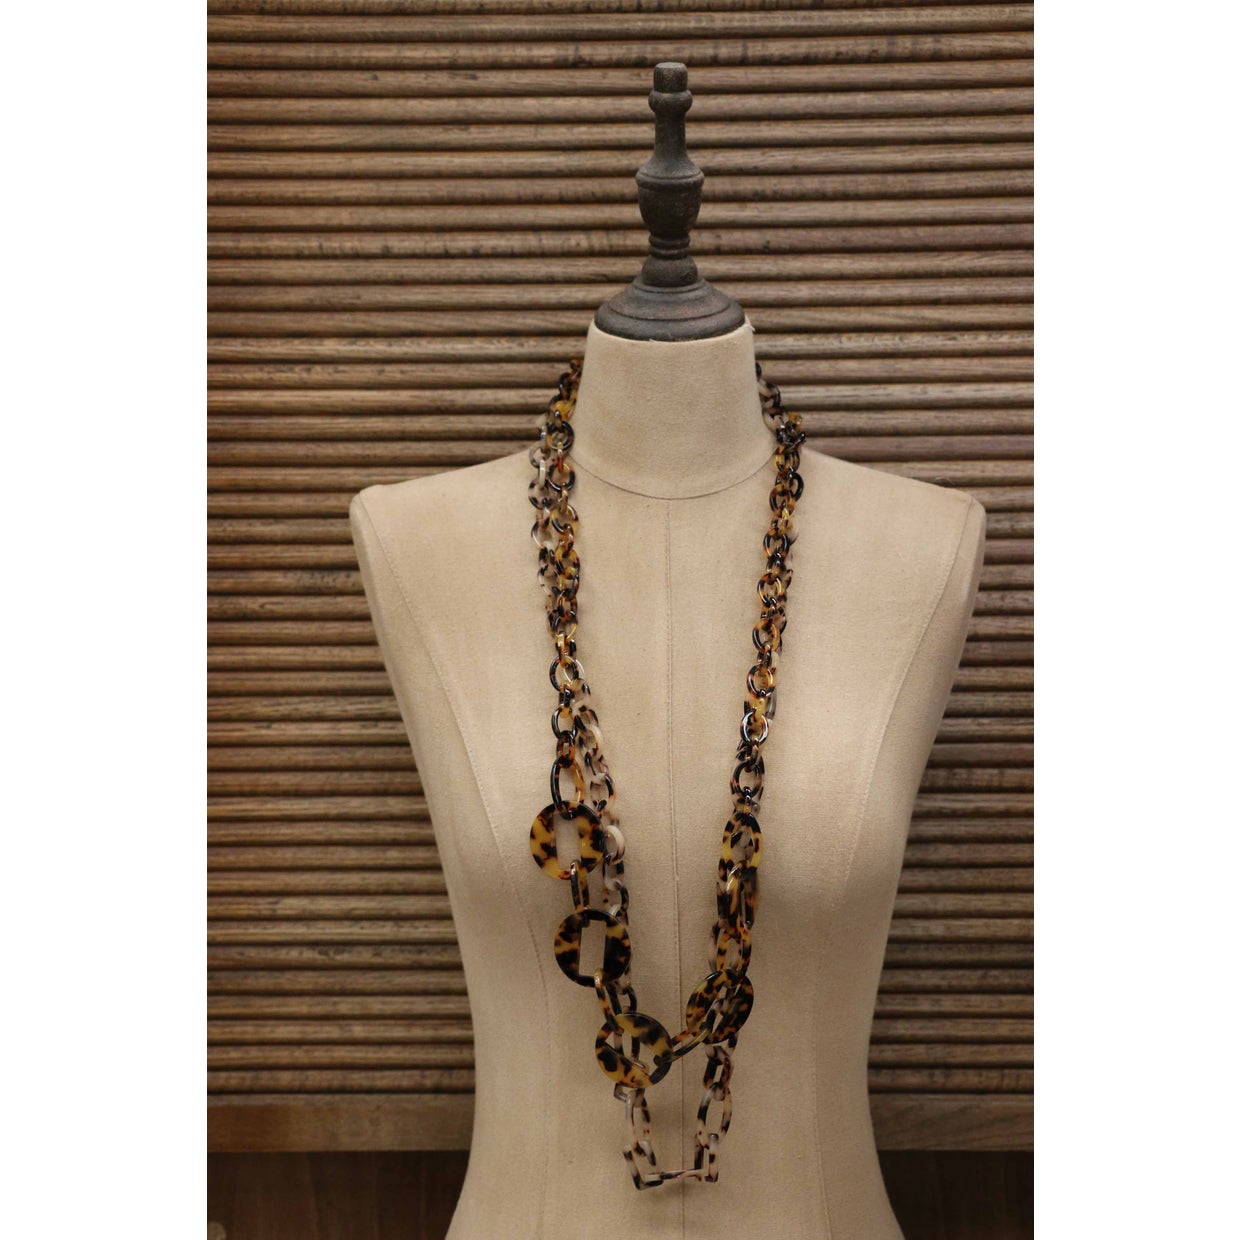  Beige Tortoise Shell Style Chain & Link Necklace SPRING SPECIAL